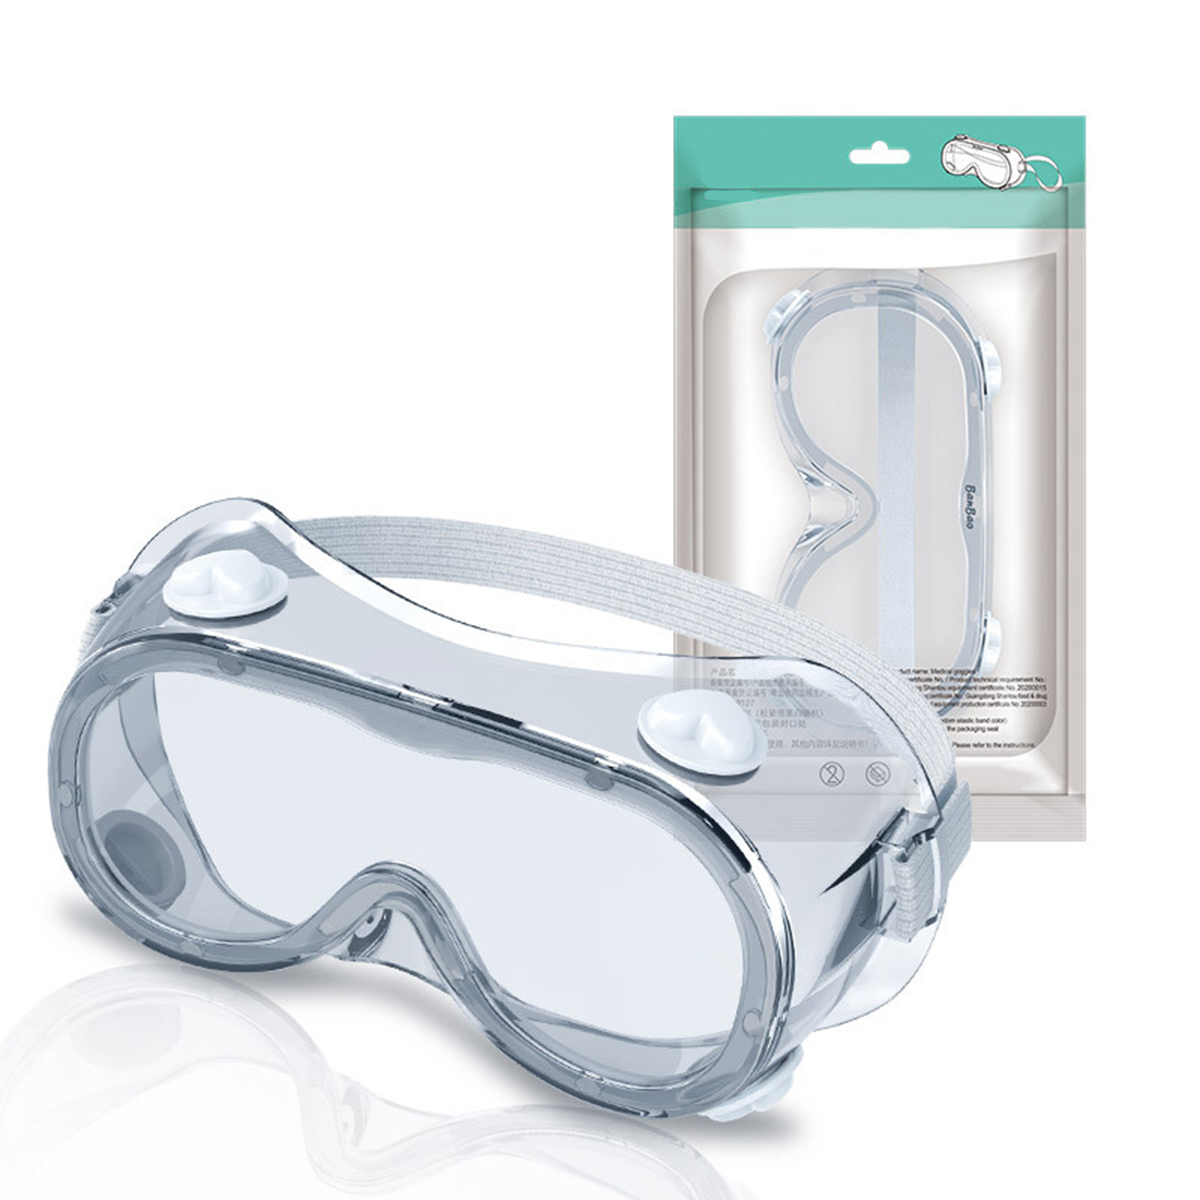 FDA-CE-Safety-Goggles-Anti-Fog-Dust-Protective-Goggles-Splash-proof-Glasses-Lens-Lab-Work-Eye-Protec-1649728-11